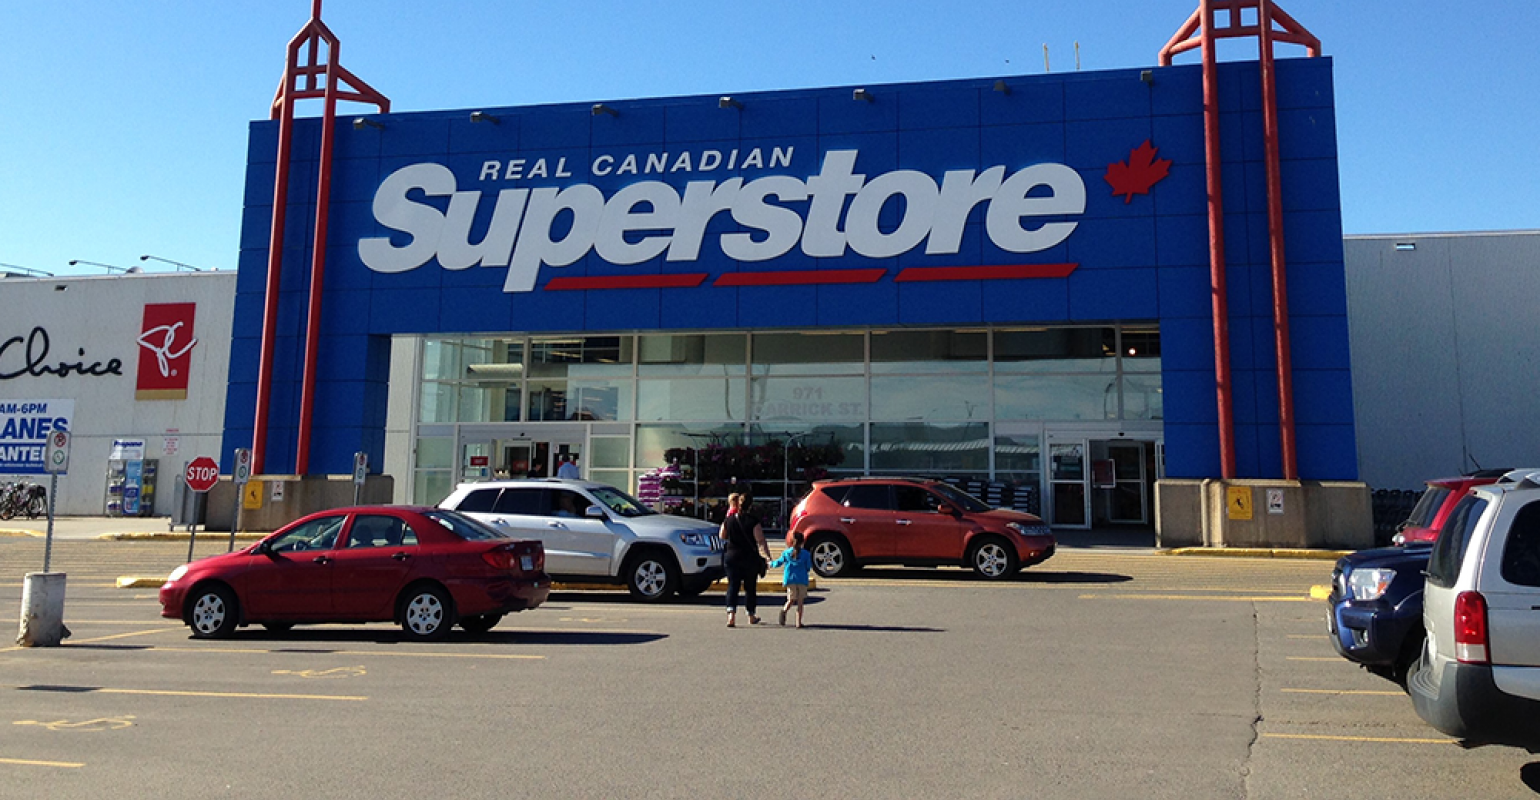 Real Canadian Superstore Powered by Instacart